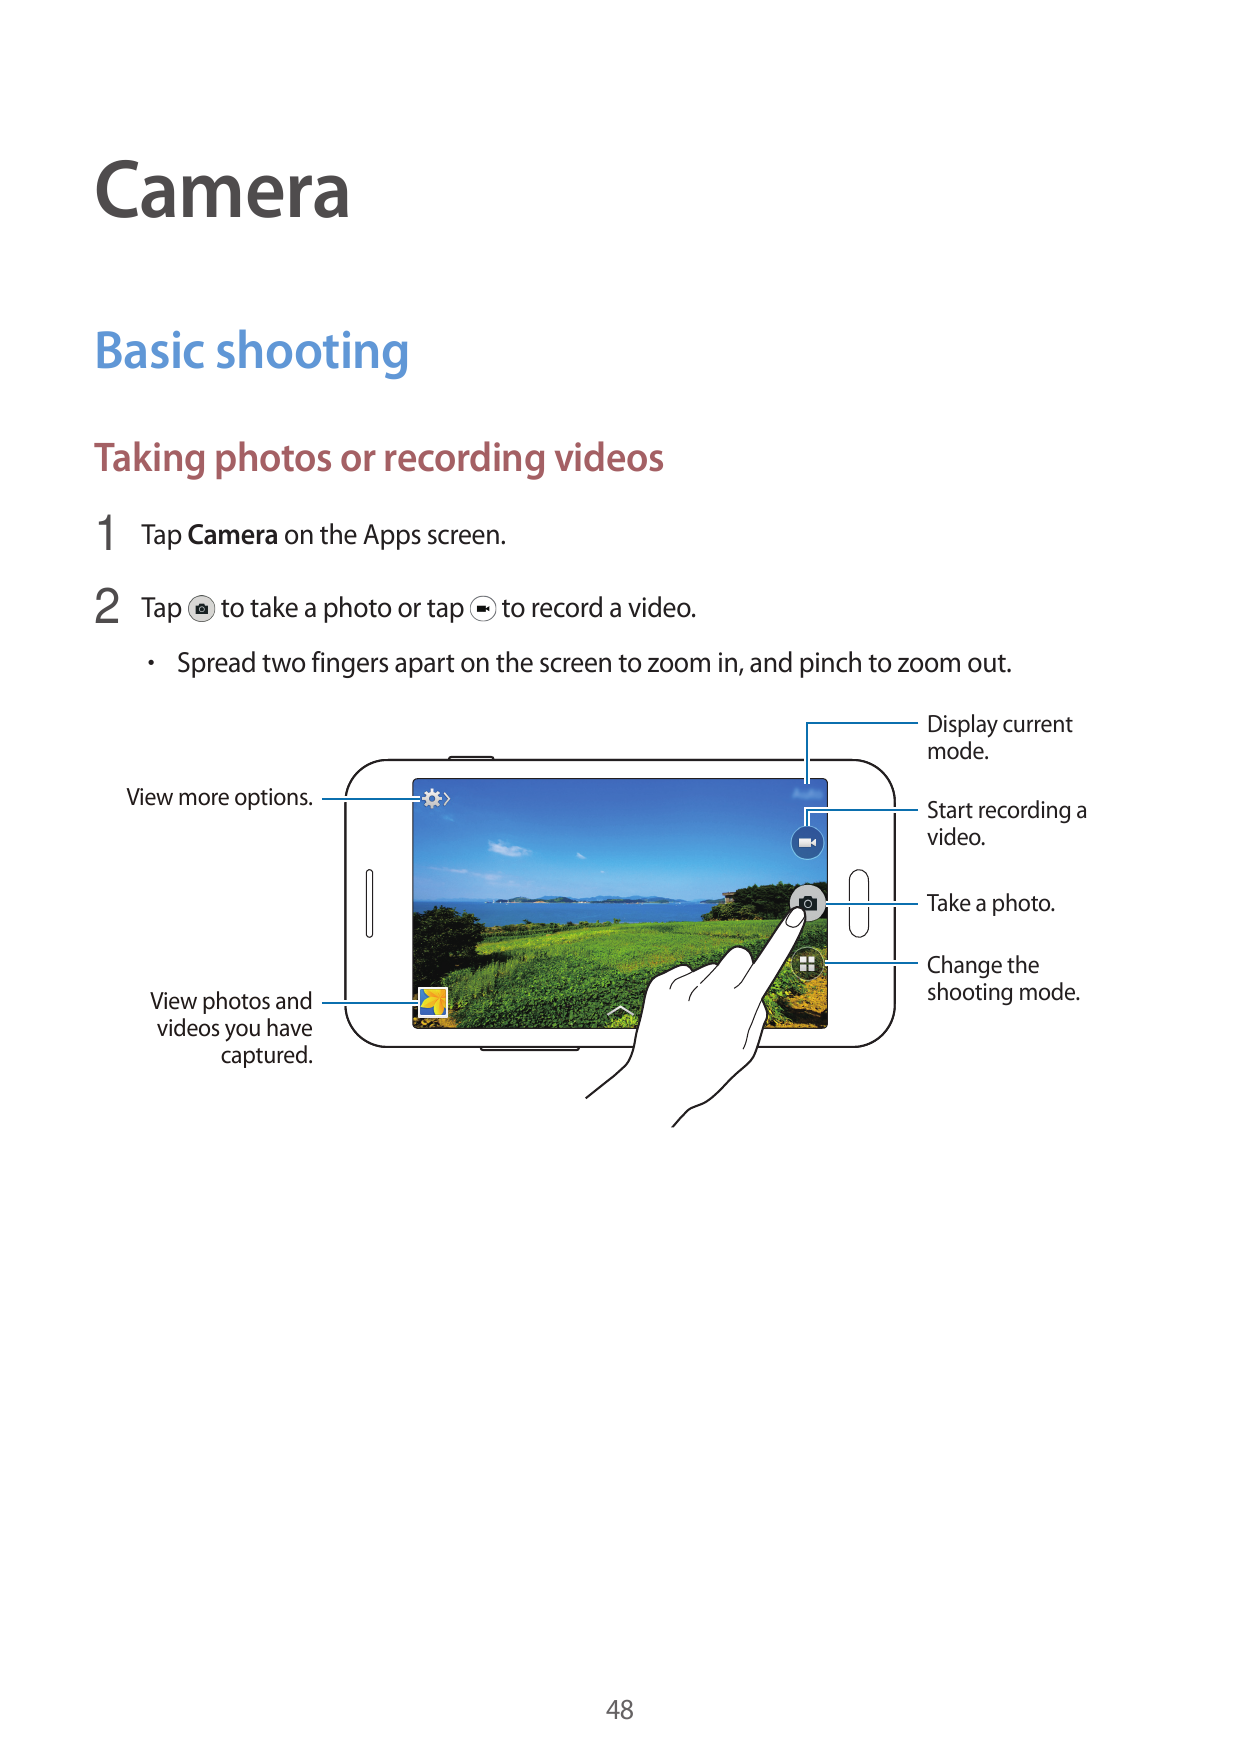 CameraBasic shootingTaking photos or recording videos1 Tap Camera on the Apps screen.2 Tap to take a photo or tap to record a vi